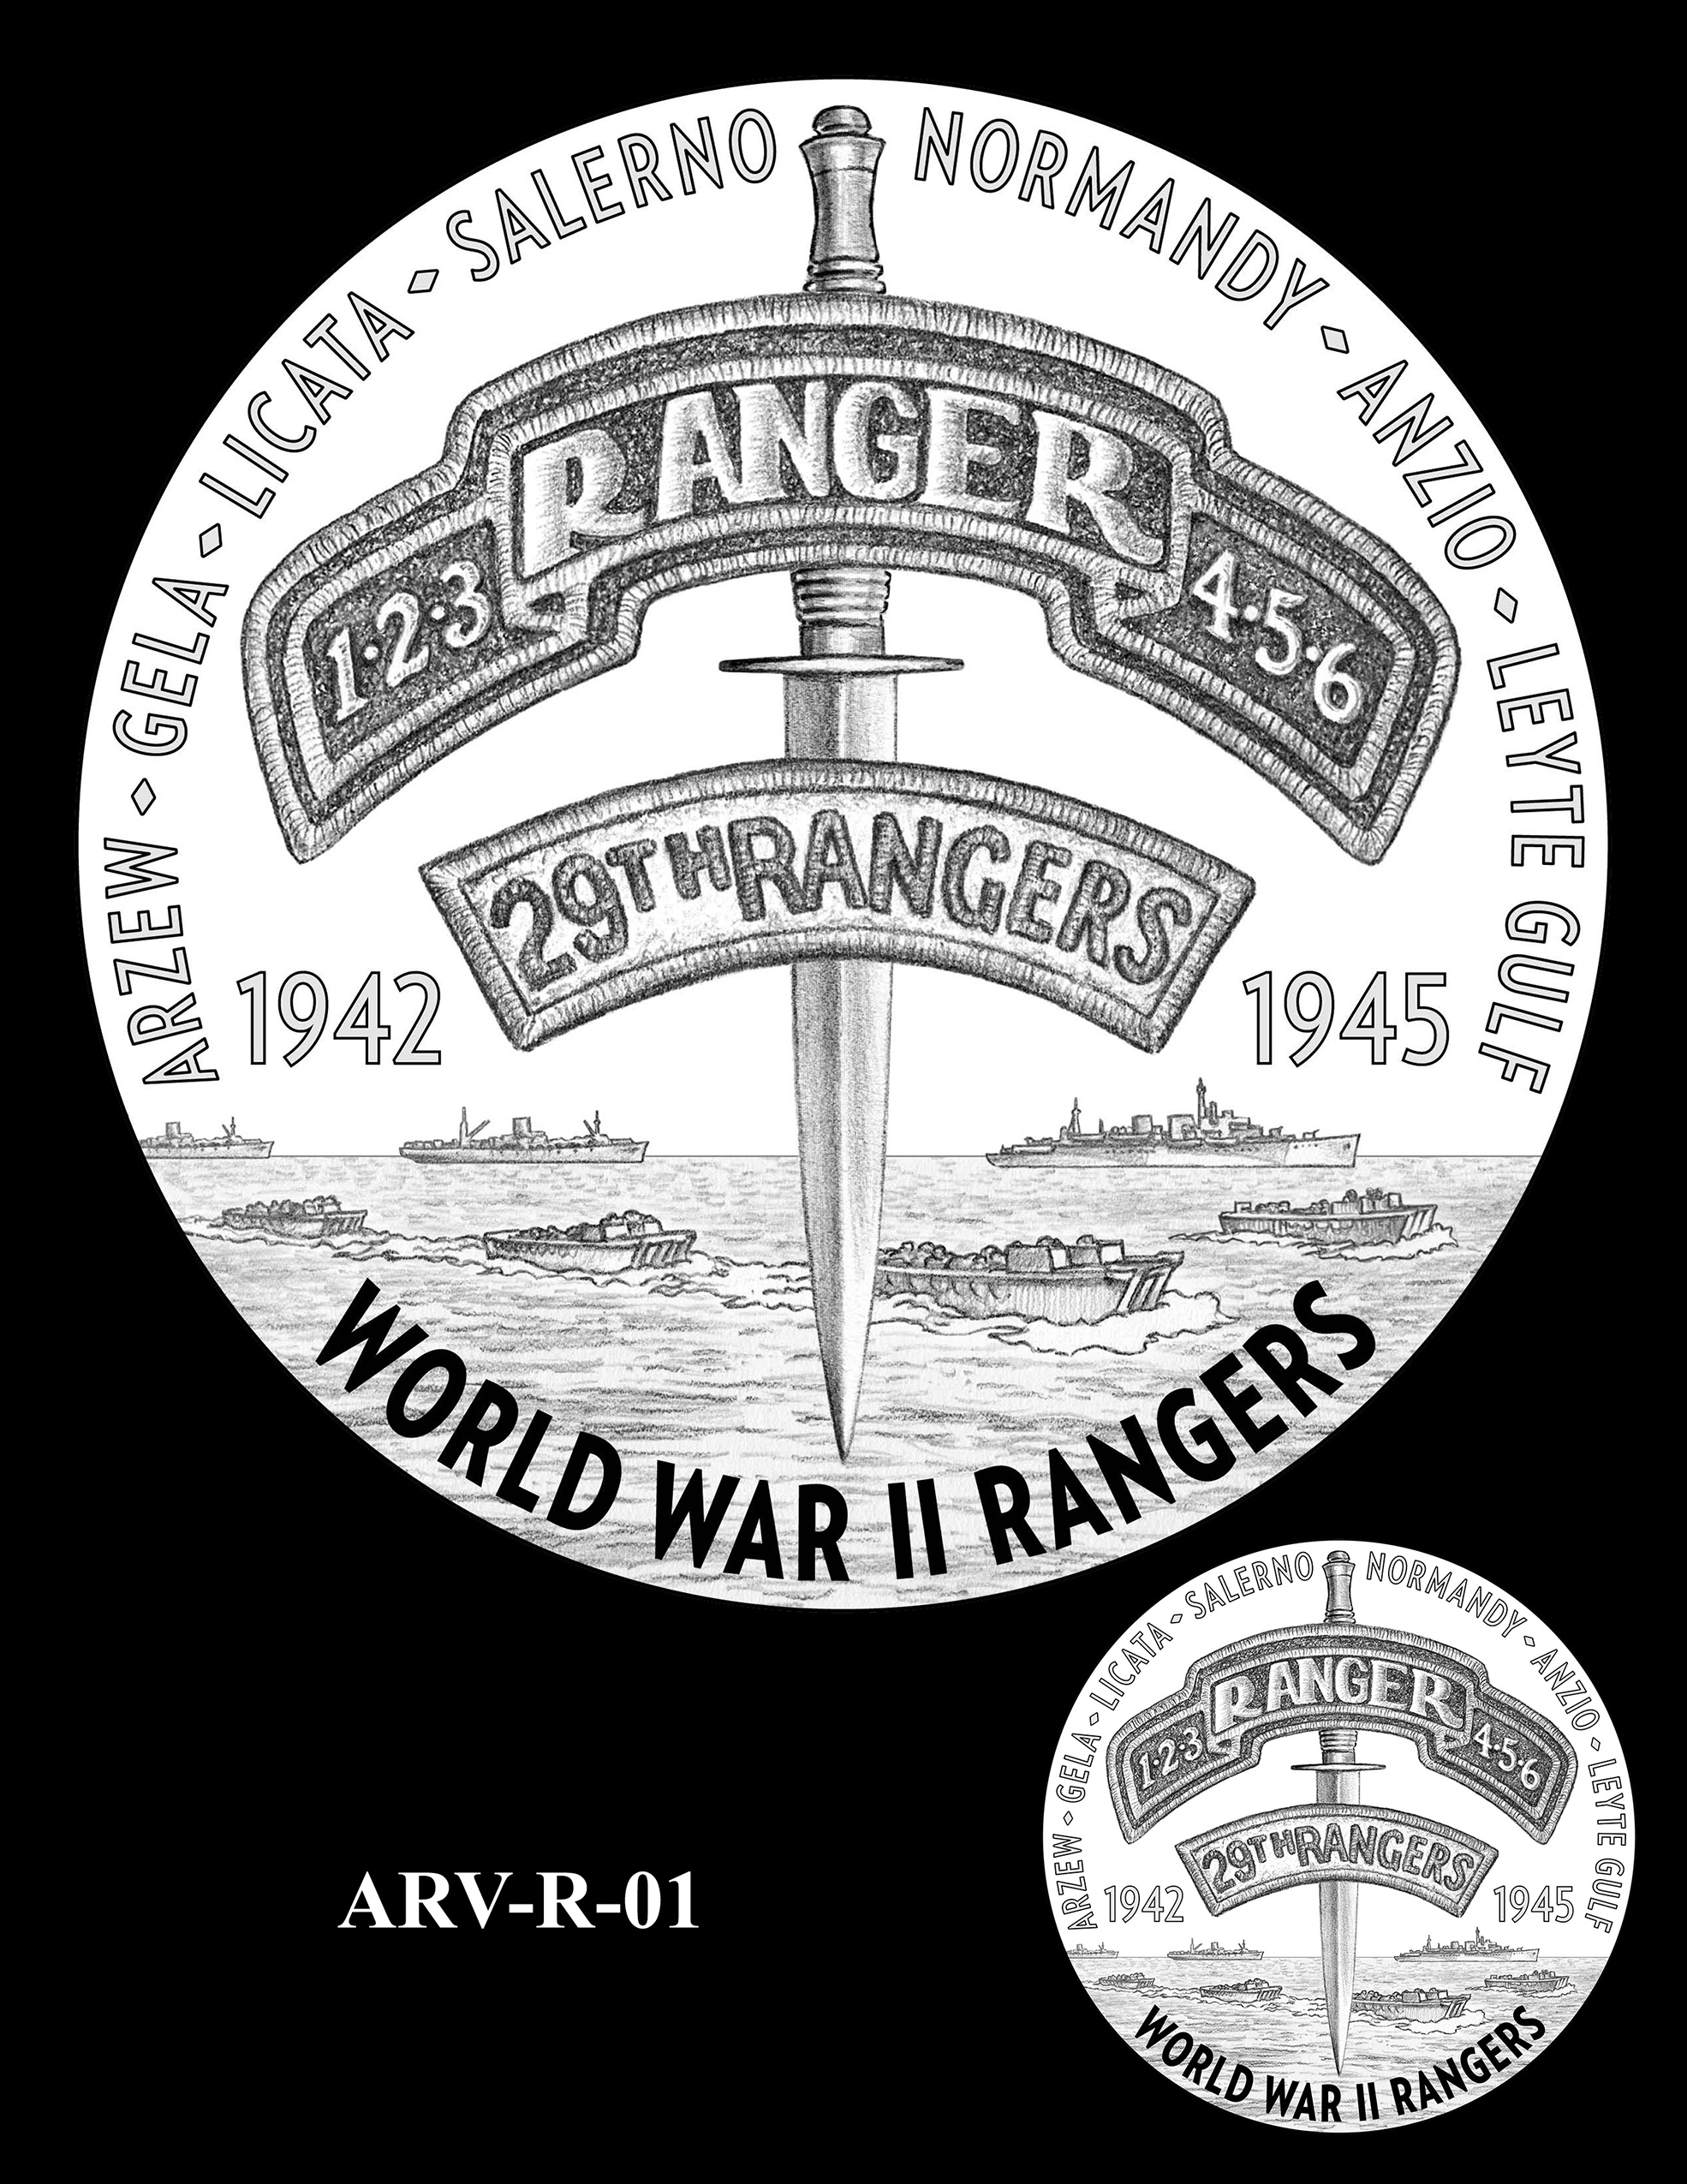 ARV-R-01 -- Army Ranger Veterans of WWII Congressional Gold Medal